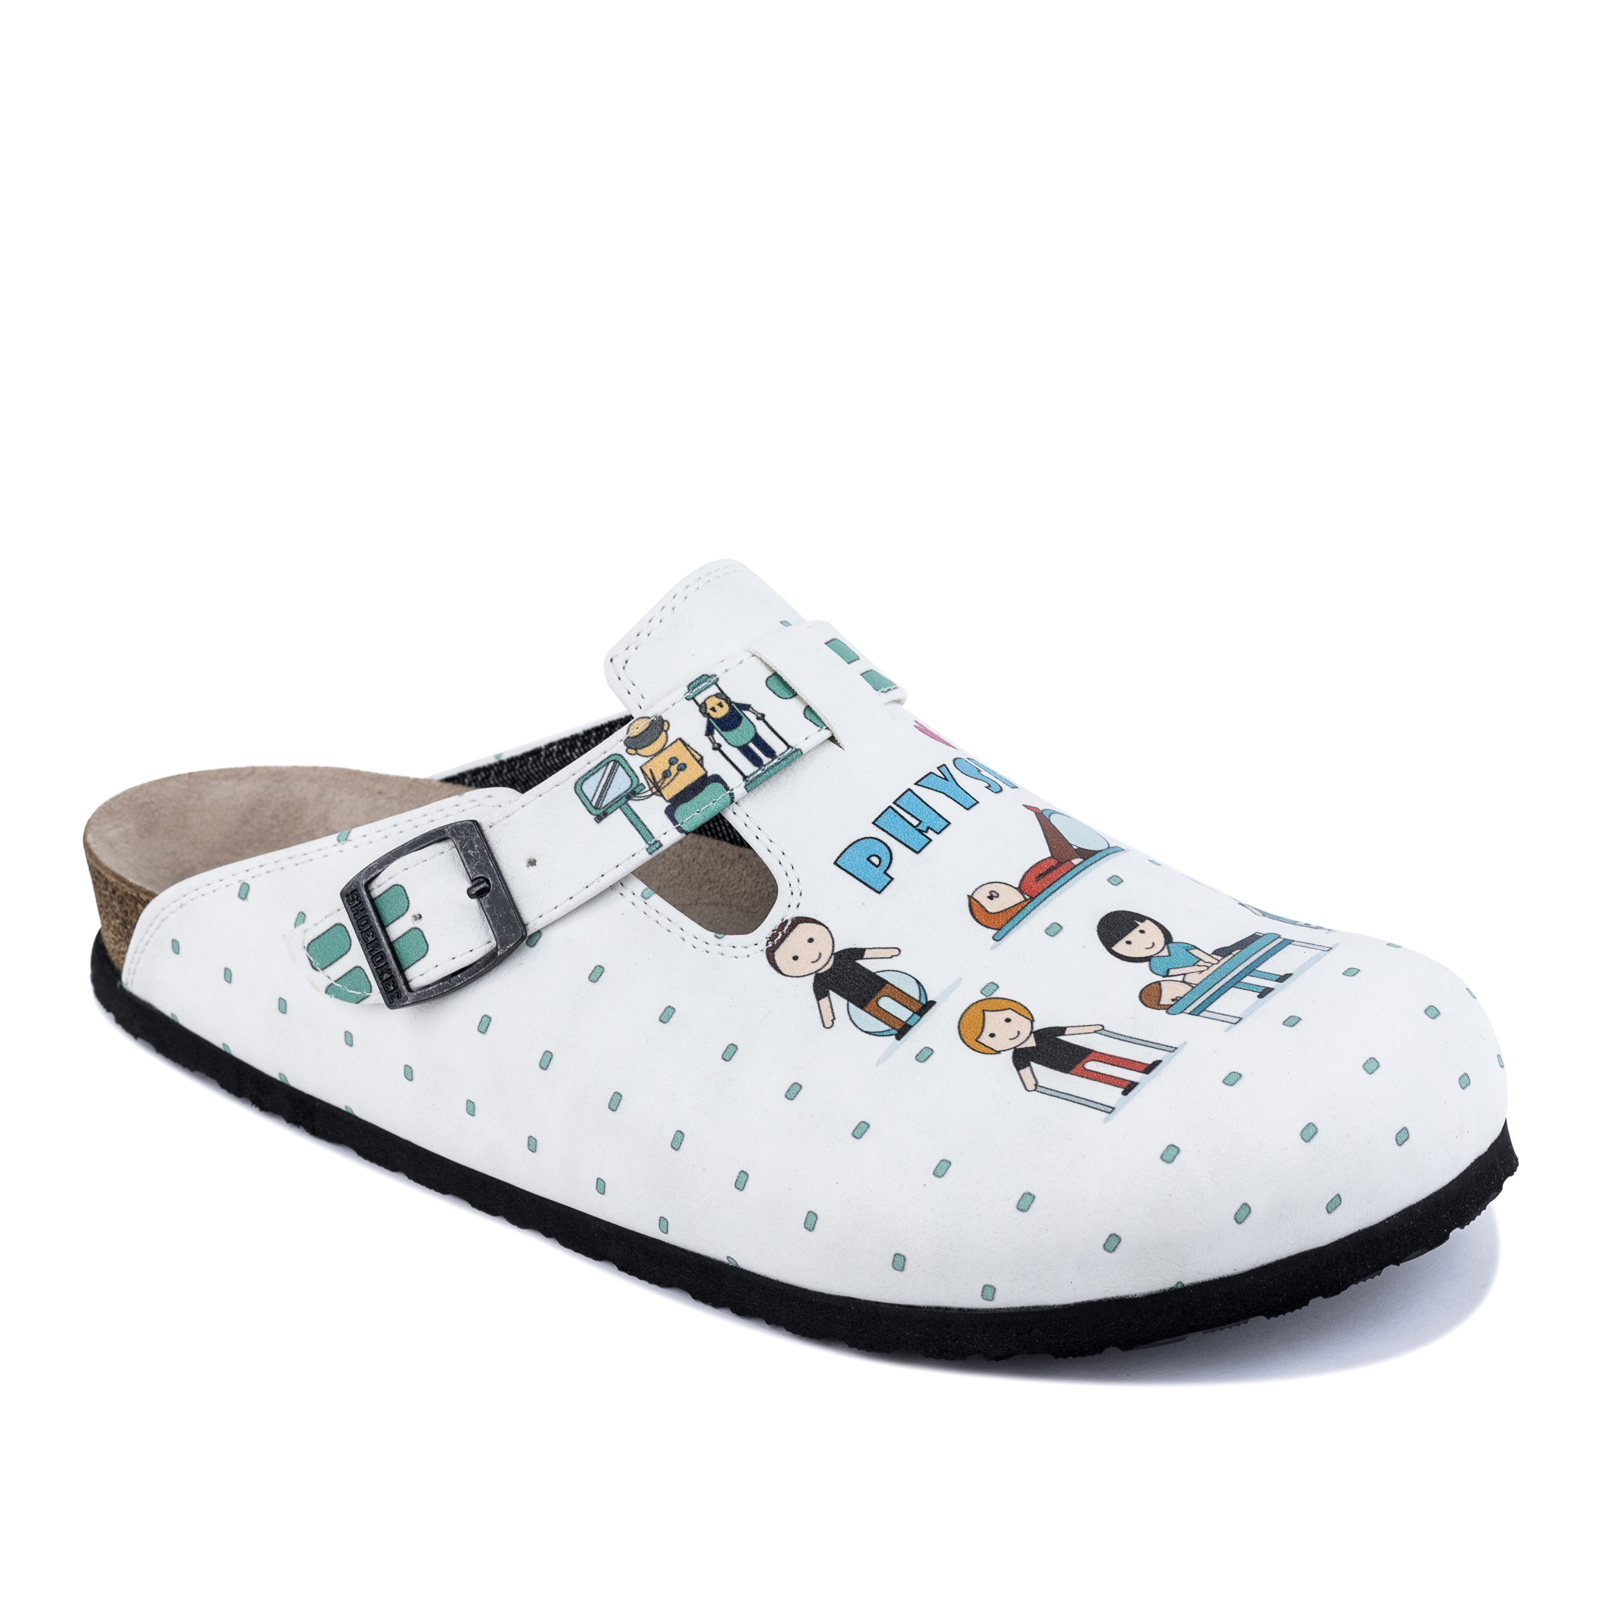 Patterned women clogs A027 - MEDICAL - WHITE